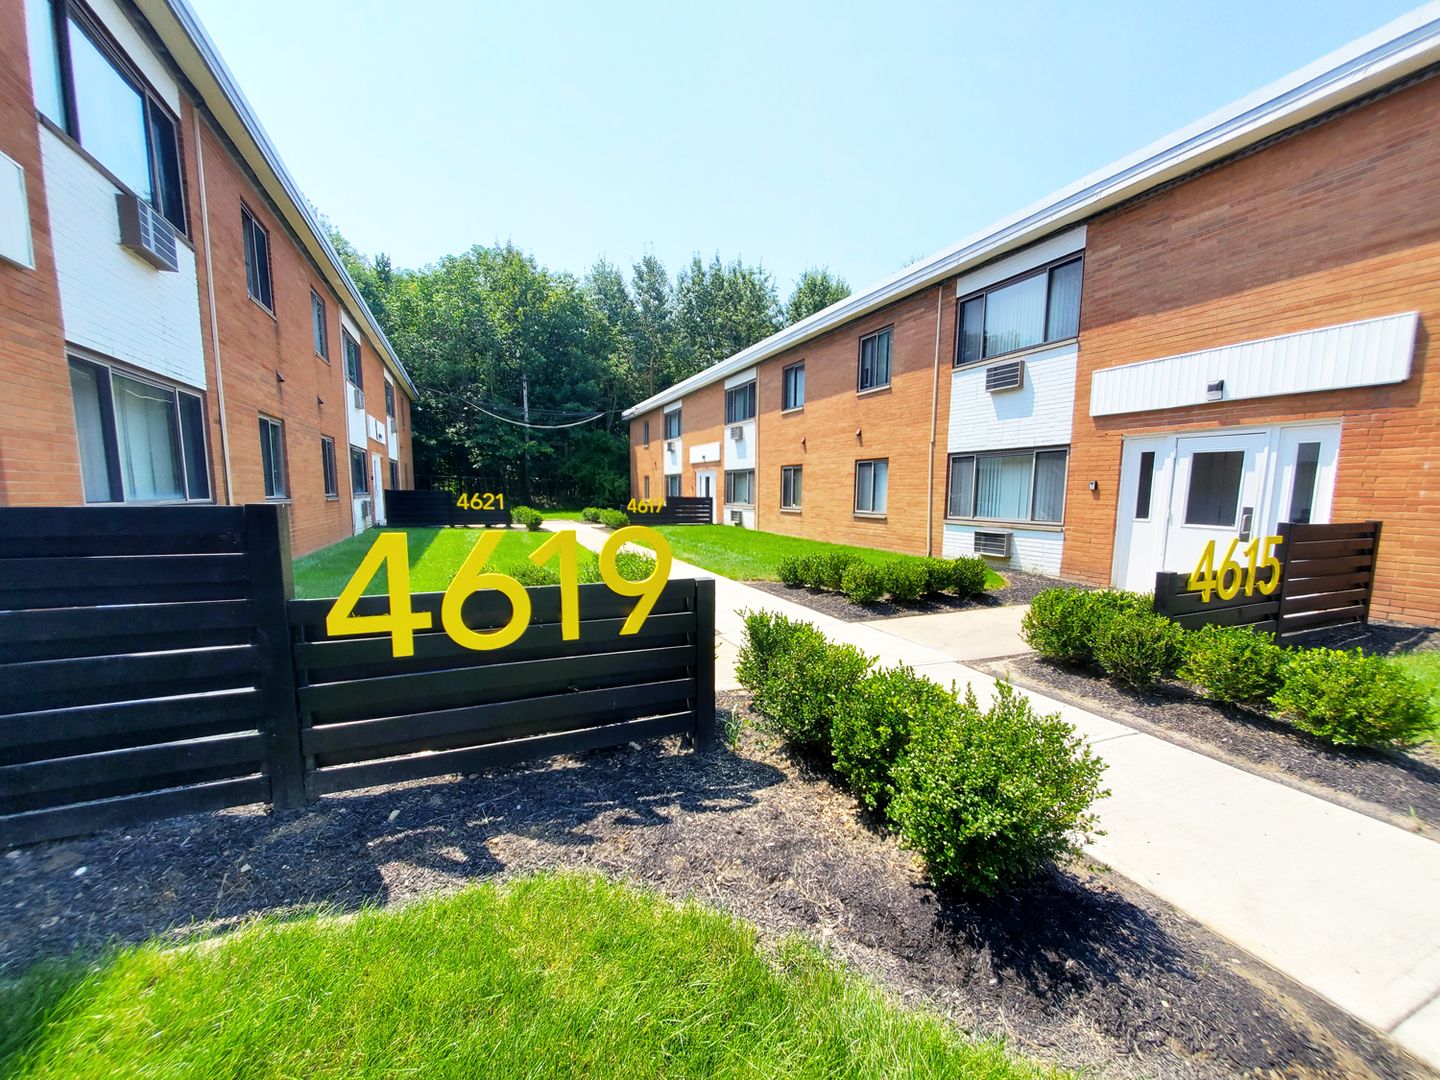 1 & 2 Bedroom Apartments for Rent | Garfield Heights | Ohio #44105 Image